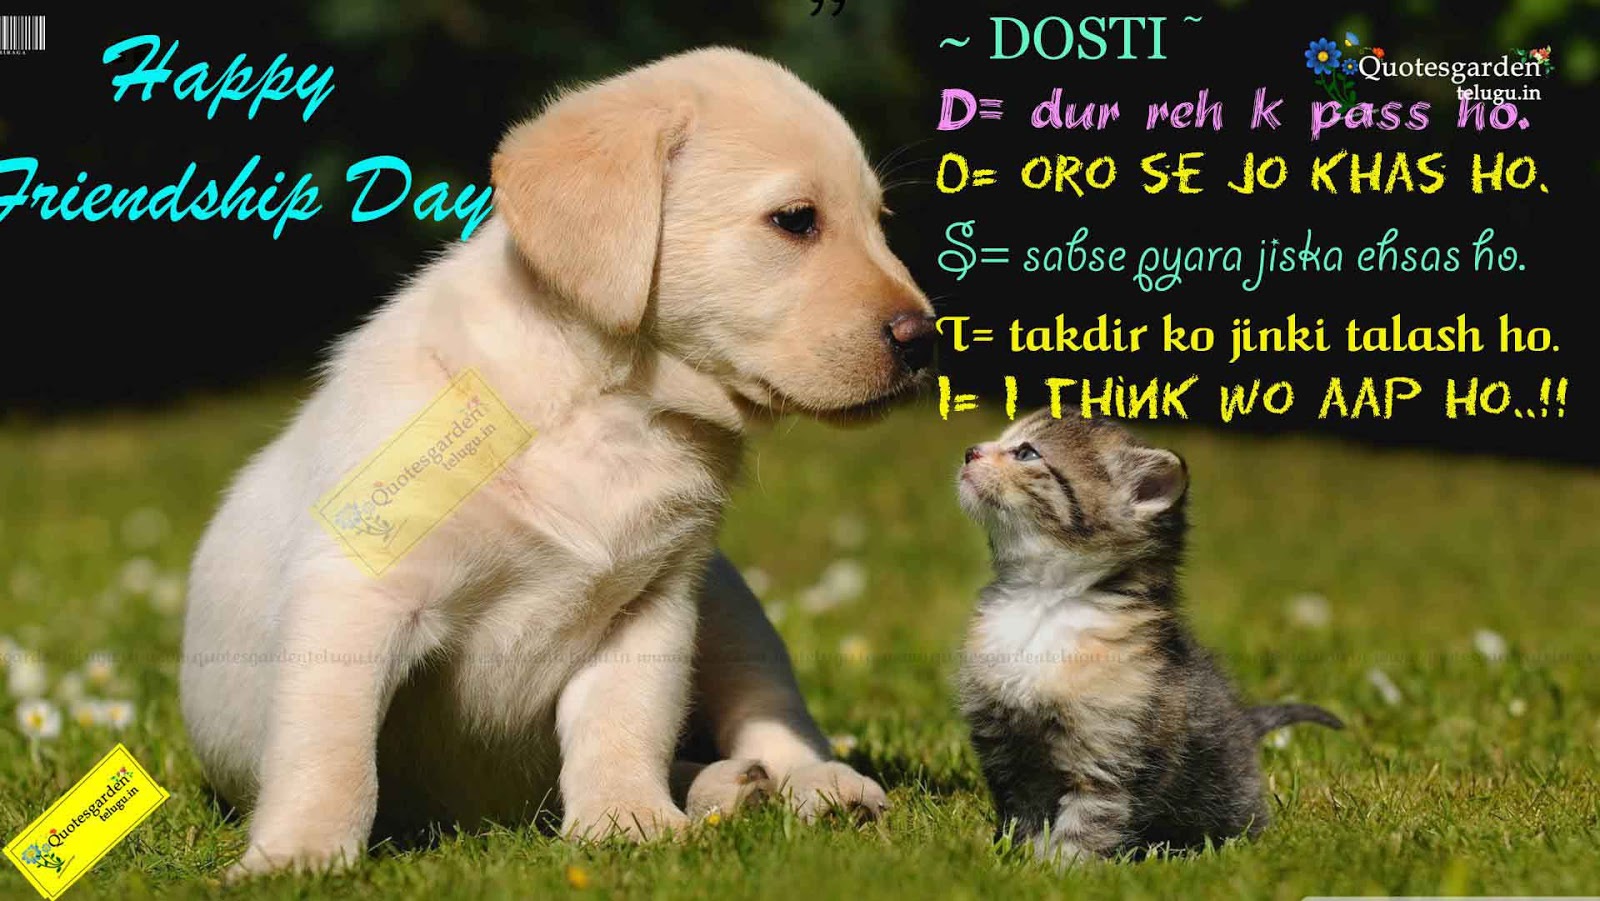 Best hindi Friendship Day quotes wallpapers greetings images 785 | QUOTES  GARDEN TELUGU | Telugu Quotes | English Quotes | Hindi Quotes |